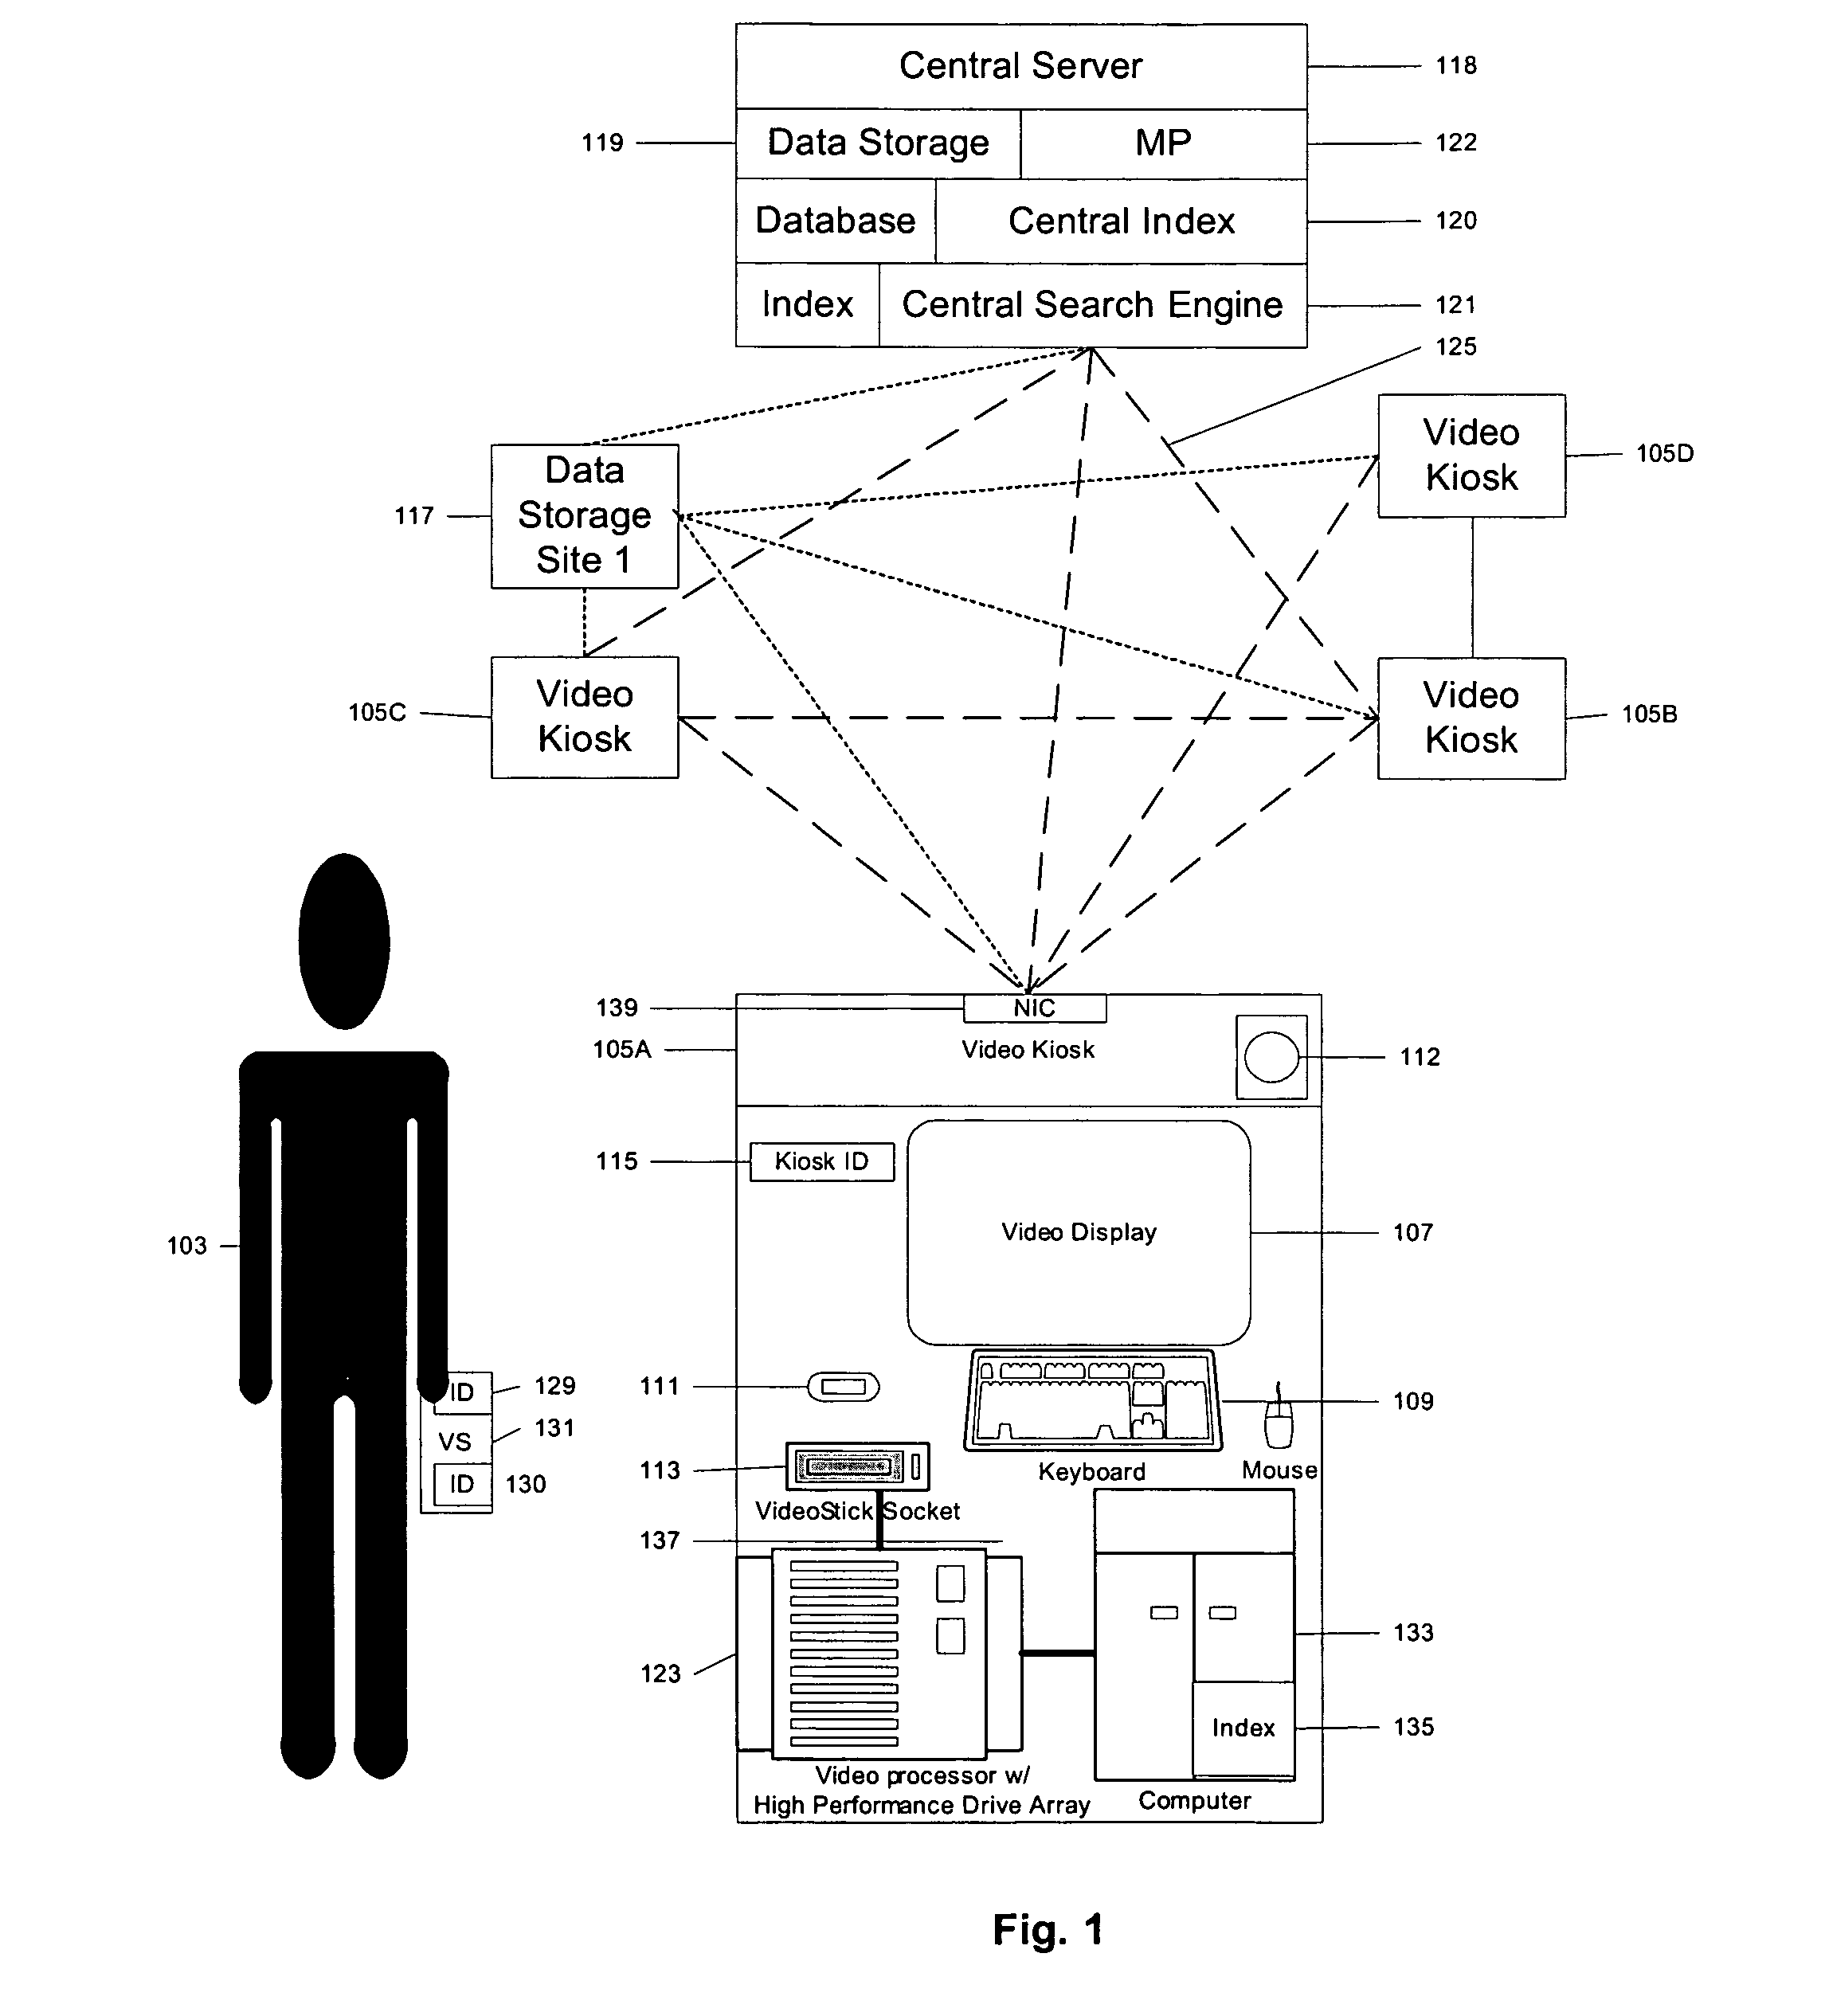 Method and apparatus for distributing a multimedia file to a public kiosk across a network